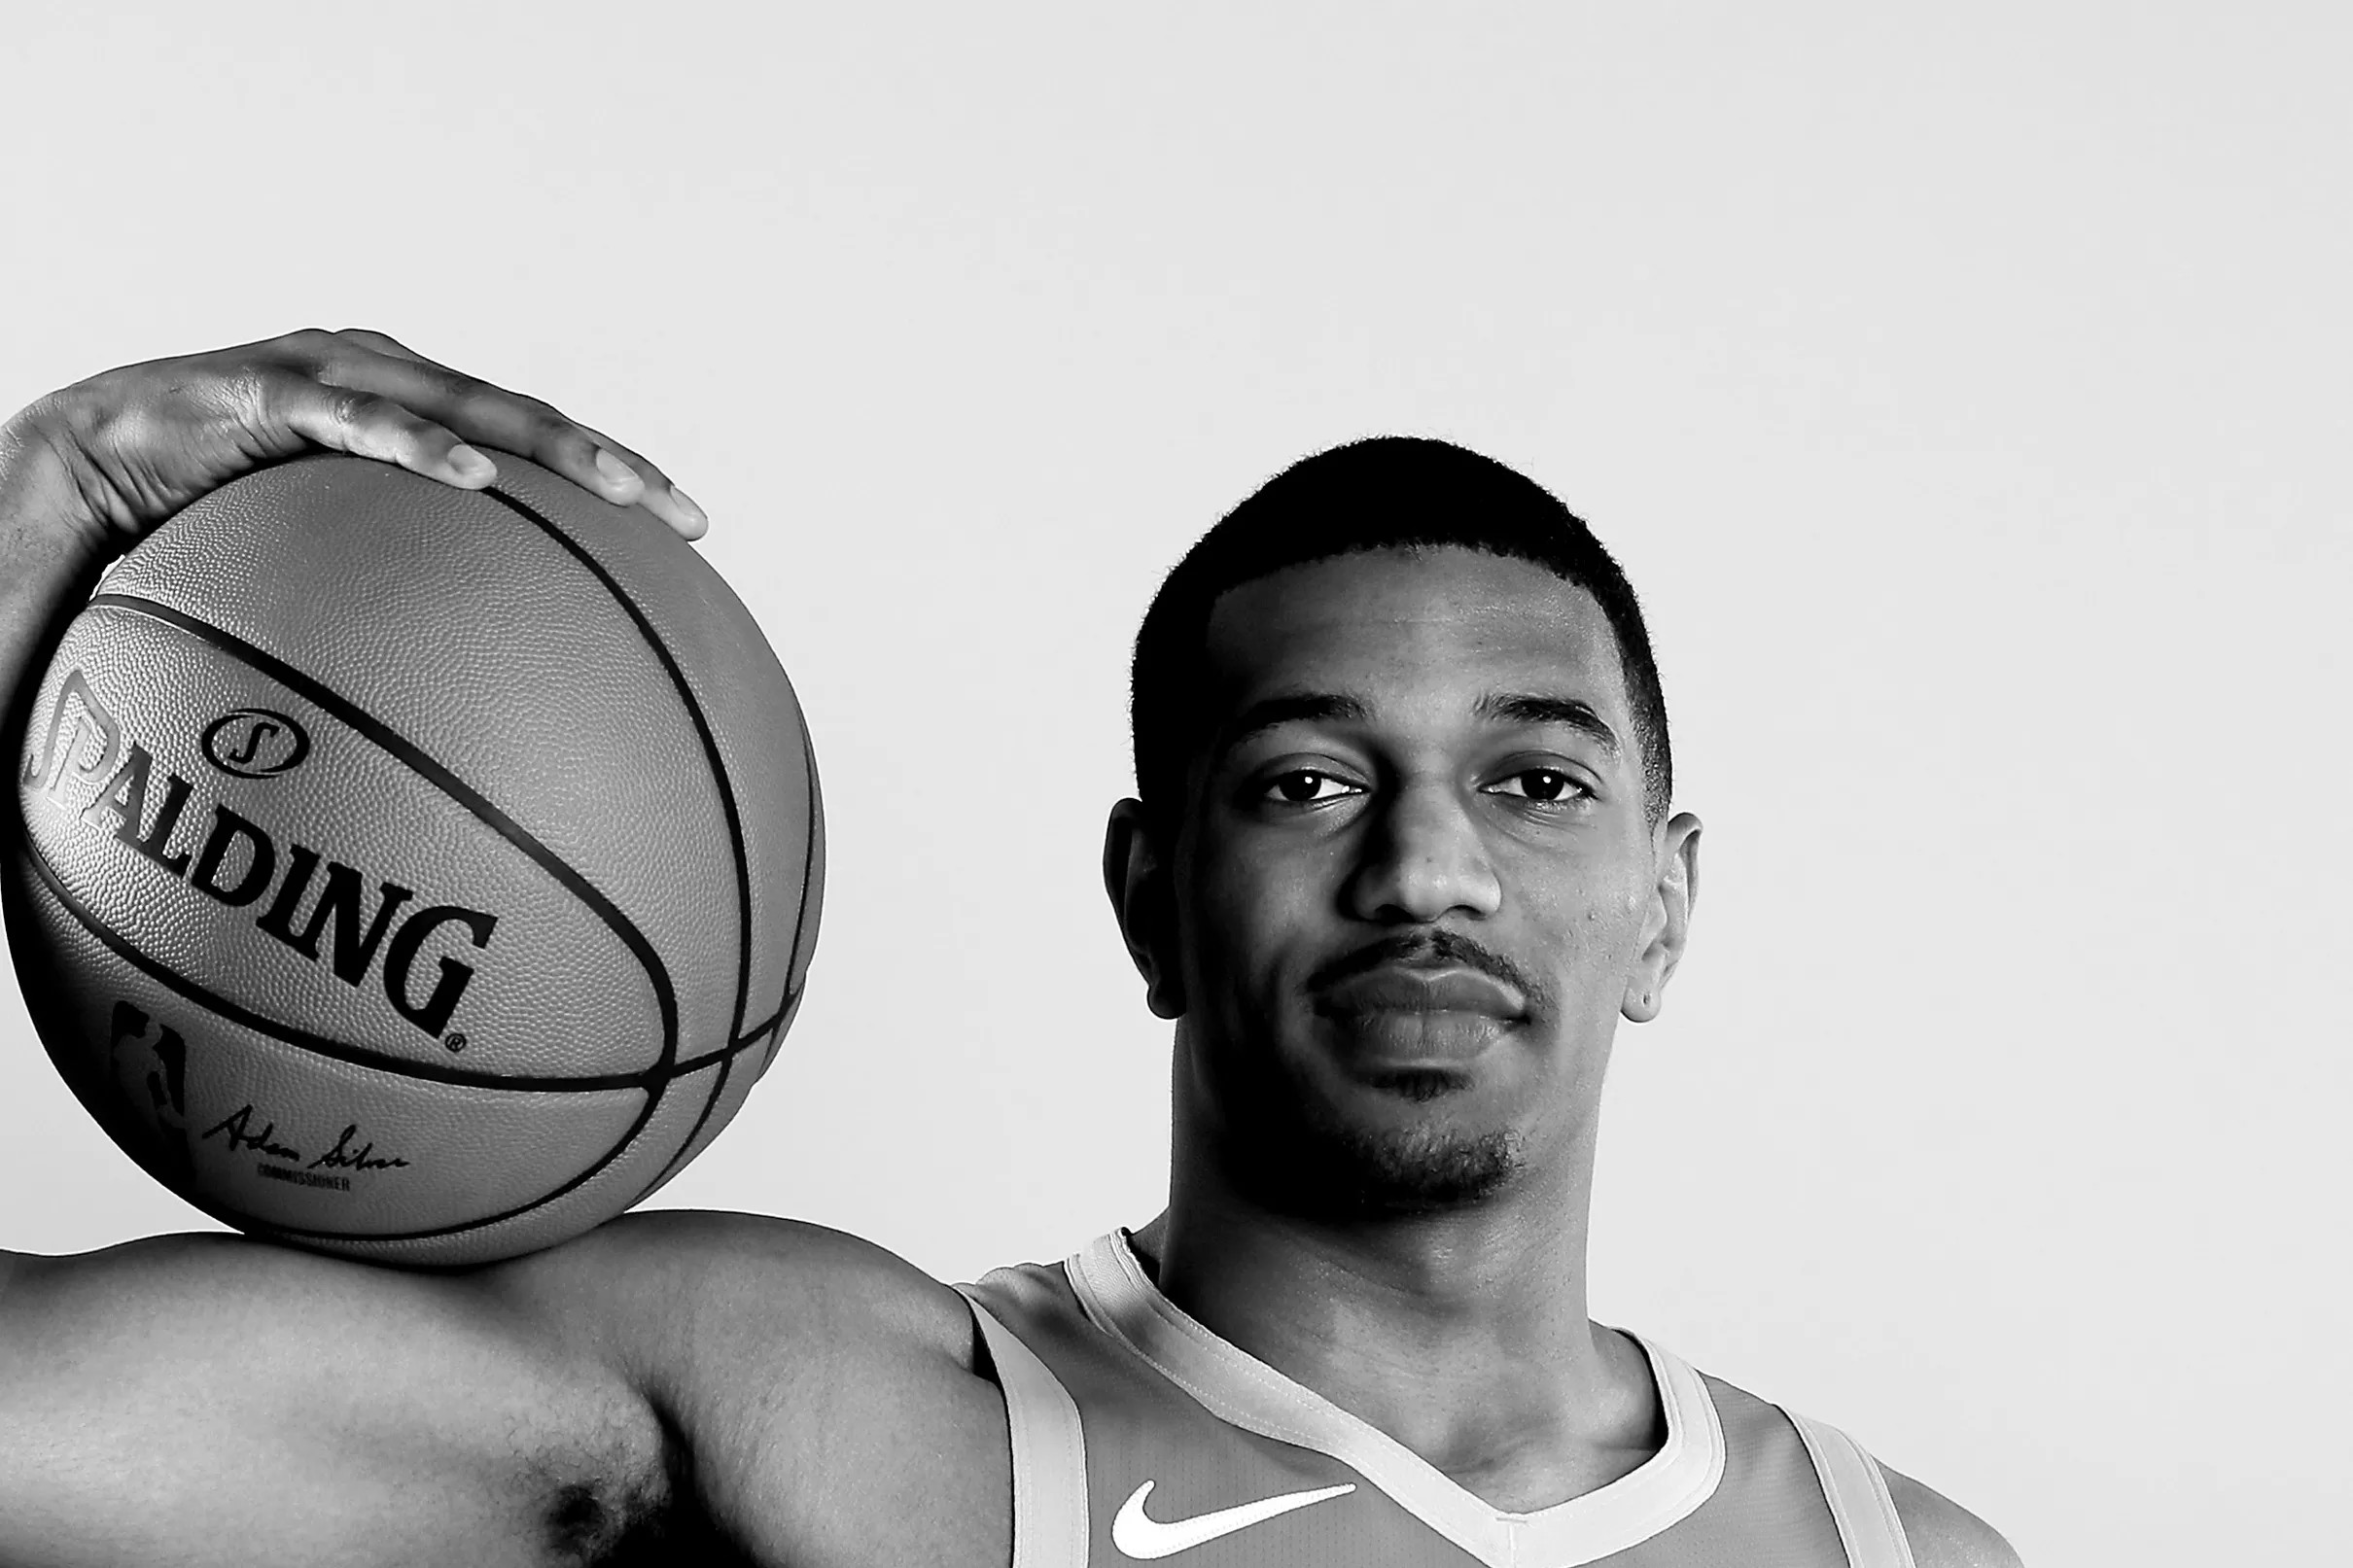 Suns sign rookie De’Anthony Melton for 2 years guaranteed